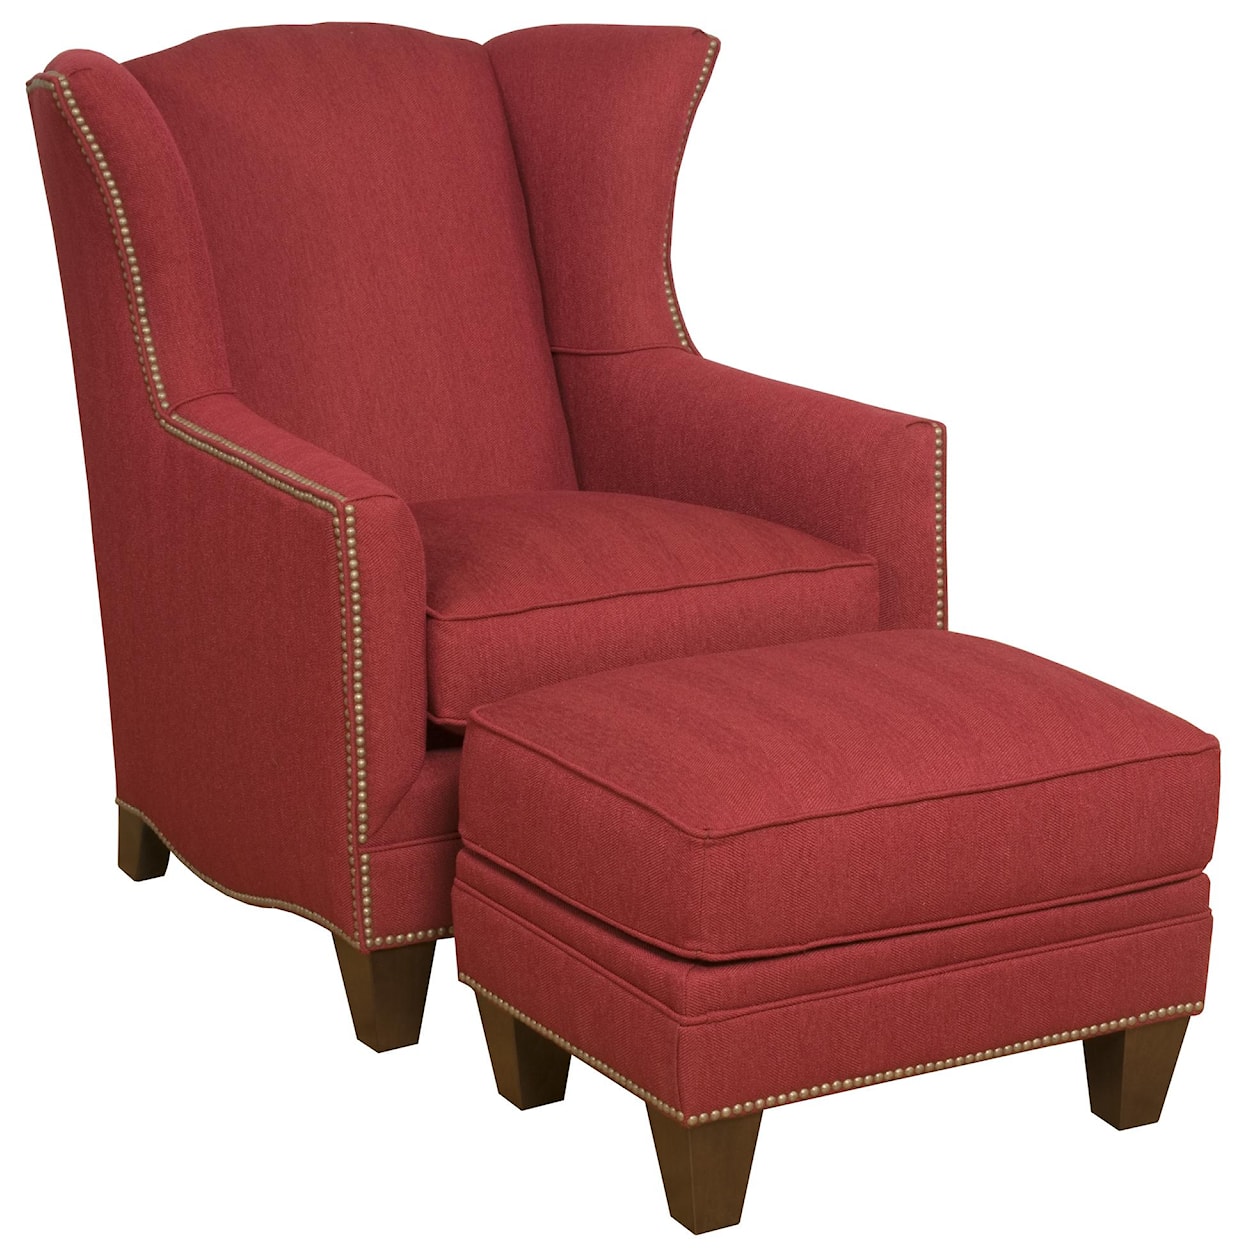 King Hickory King Hickory Accent Chairs and Ottomans Athens Accent Ottoman